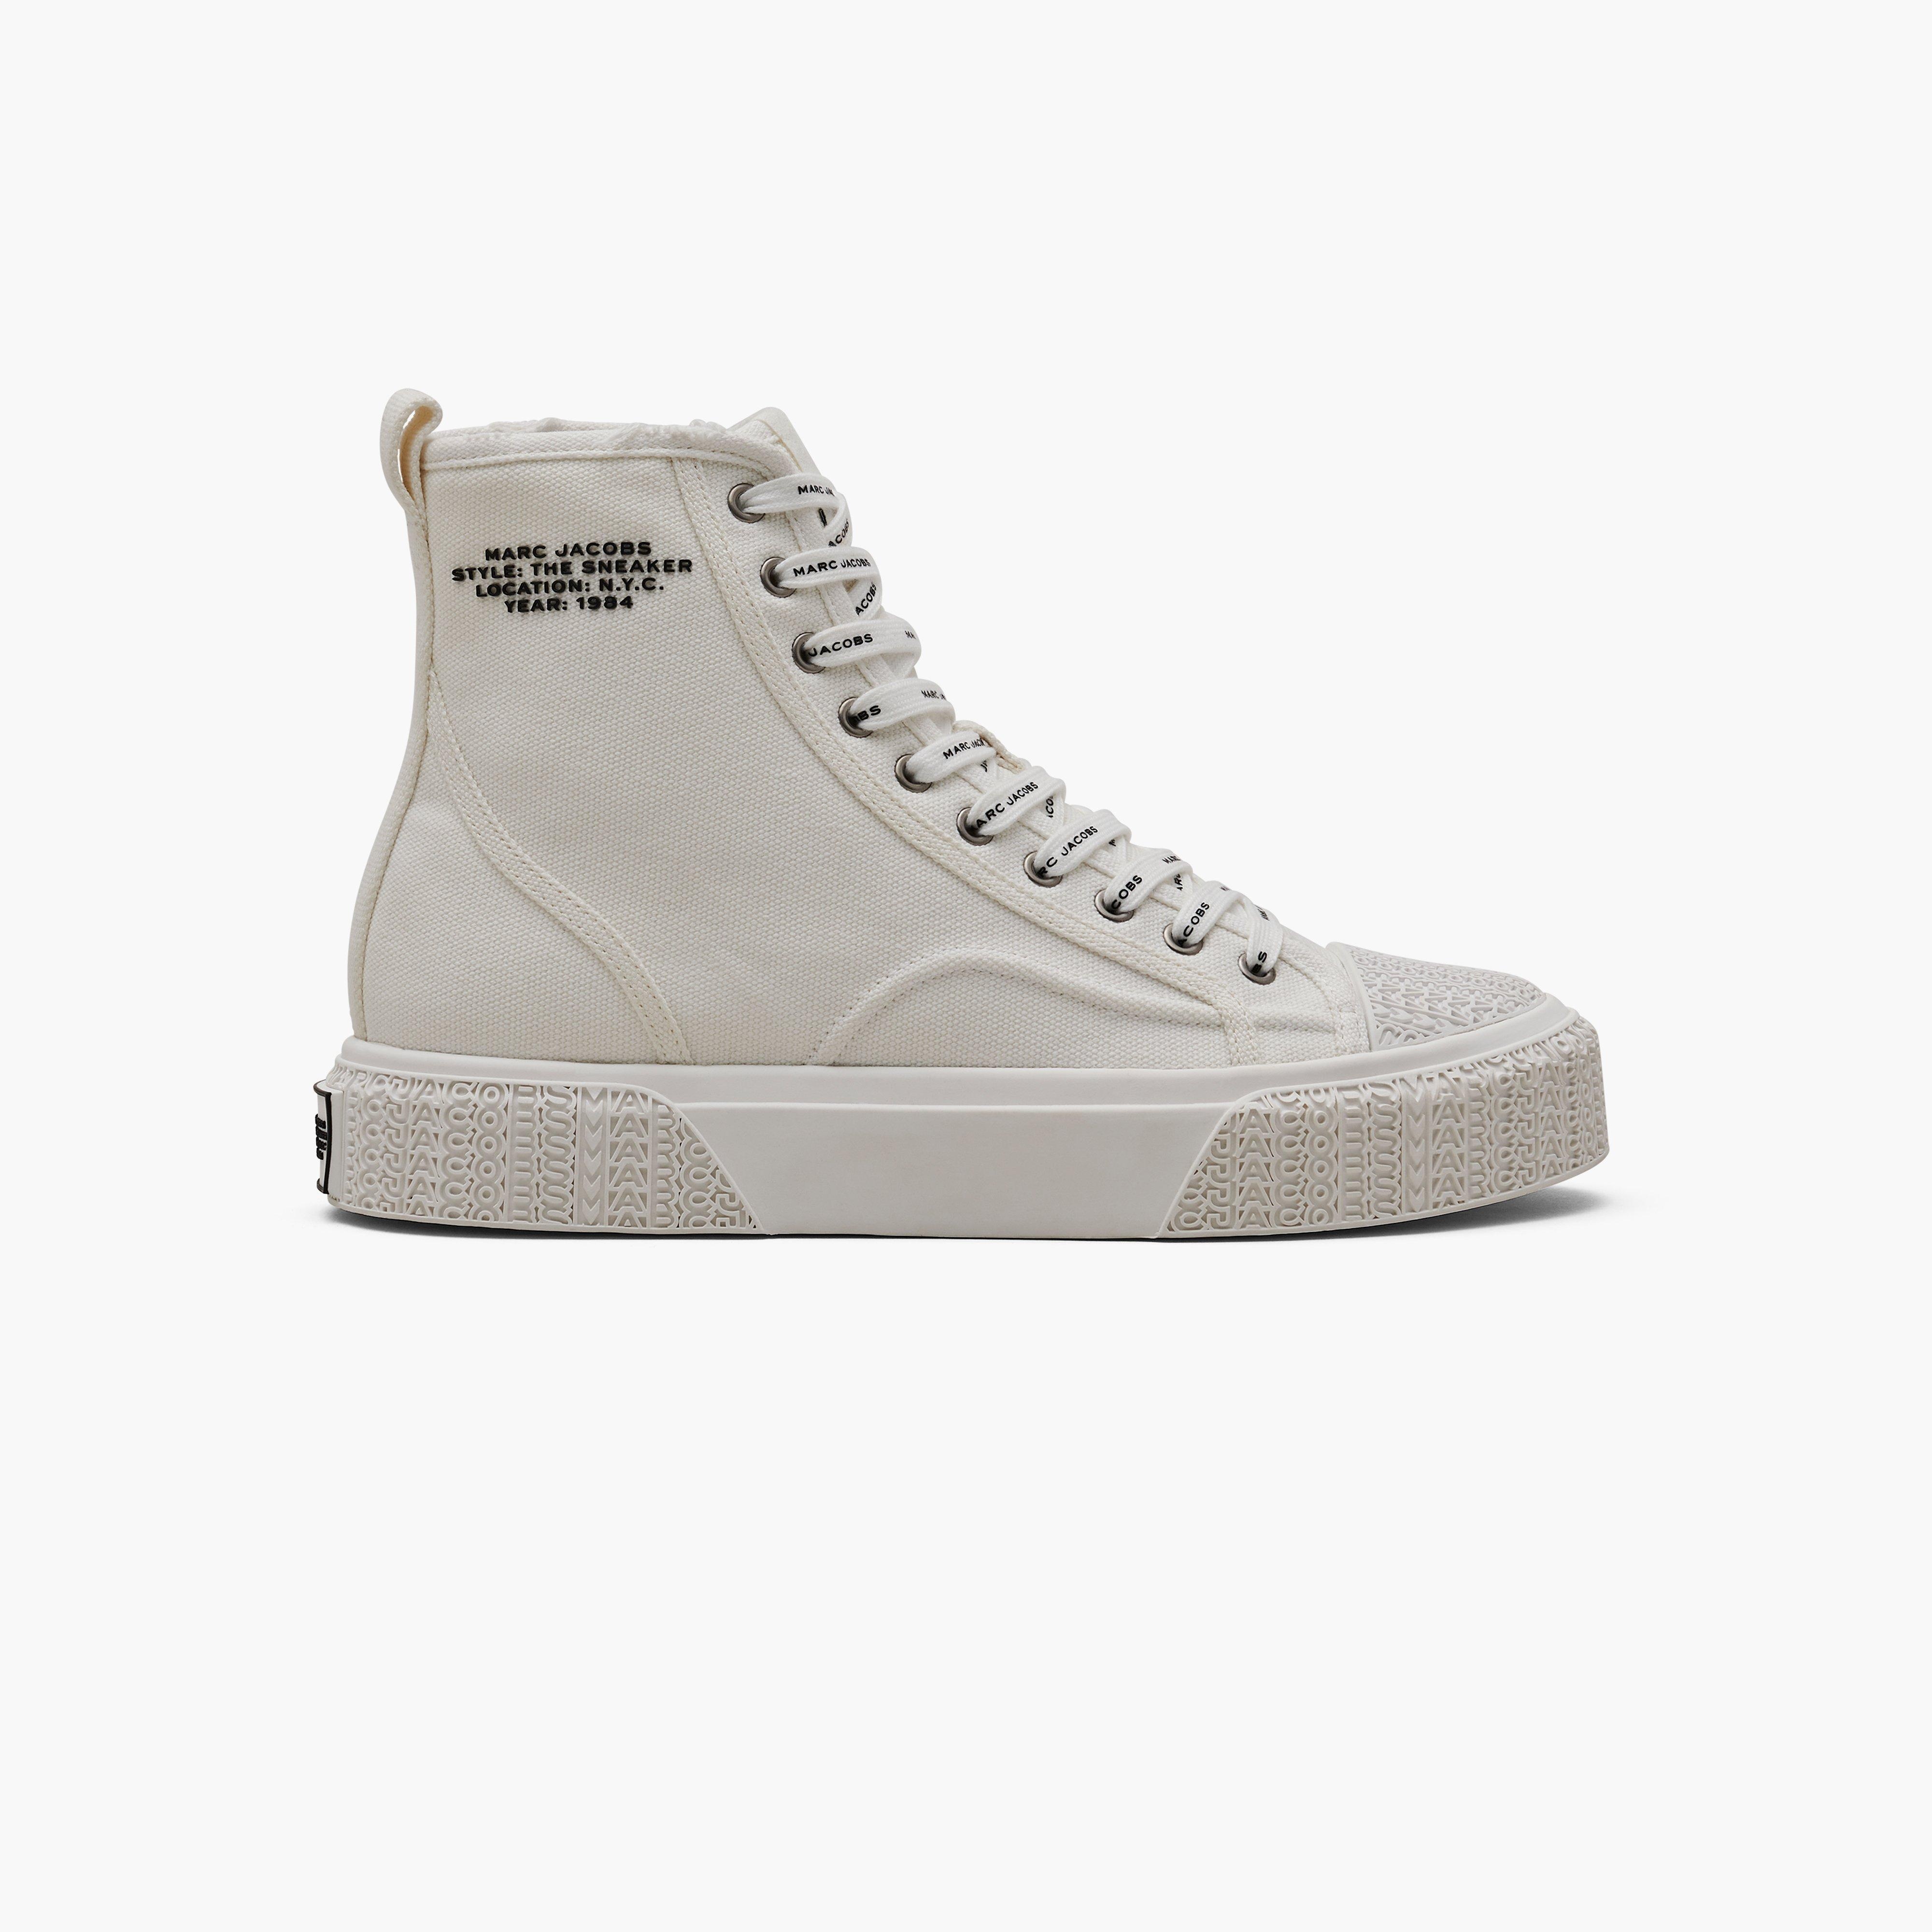 THE HIGH TOP SNEAKER - 3